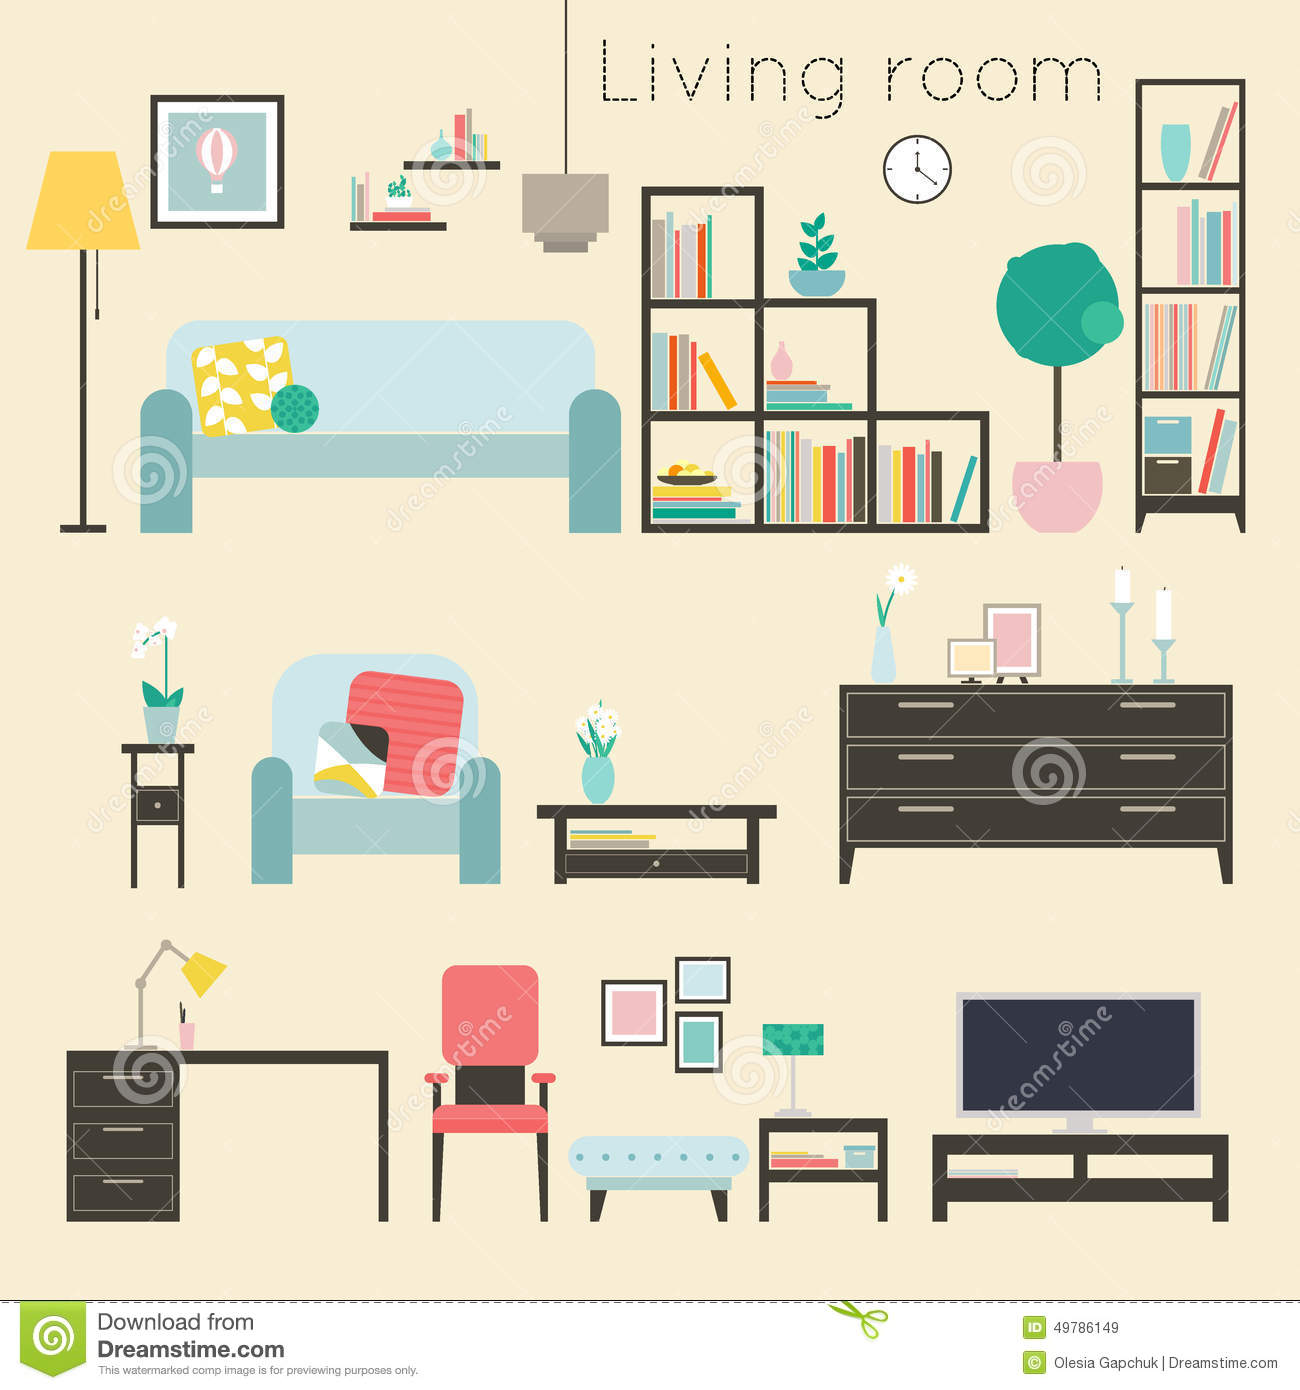 living room clipart free - photo #31